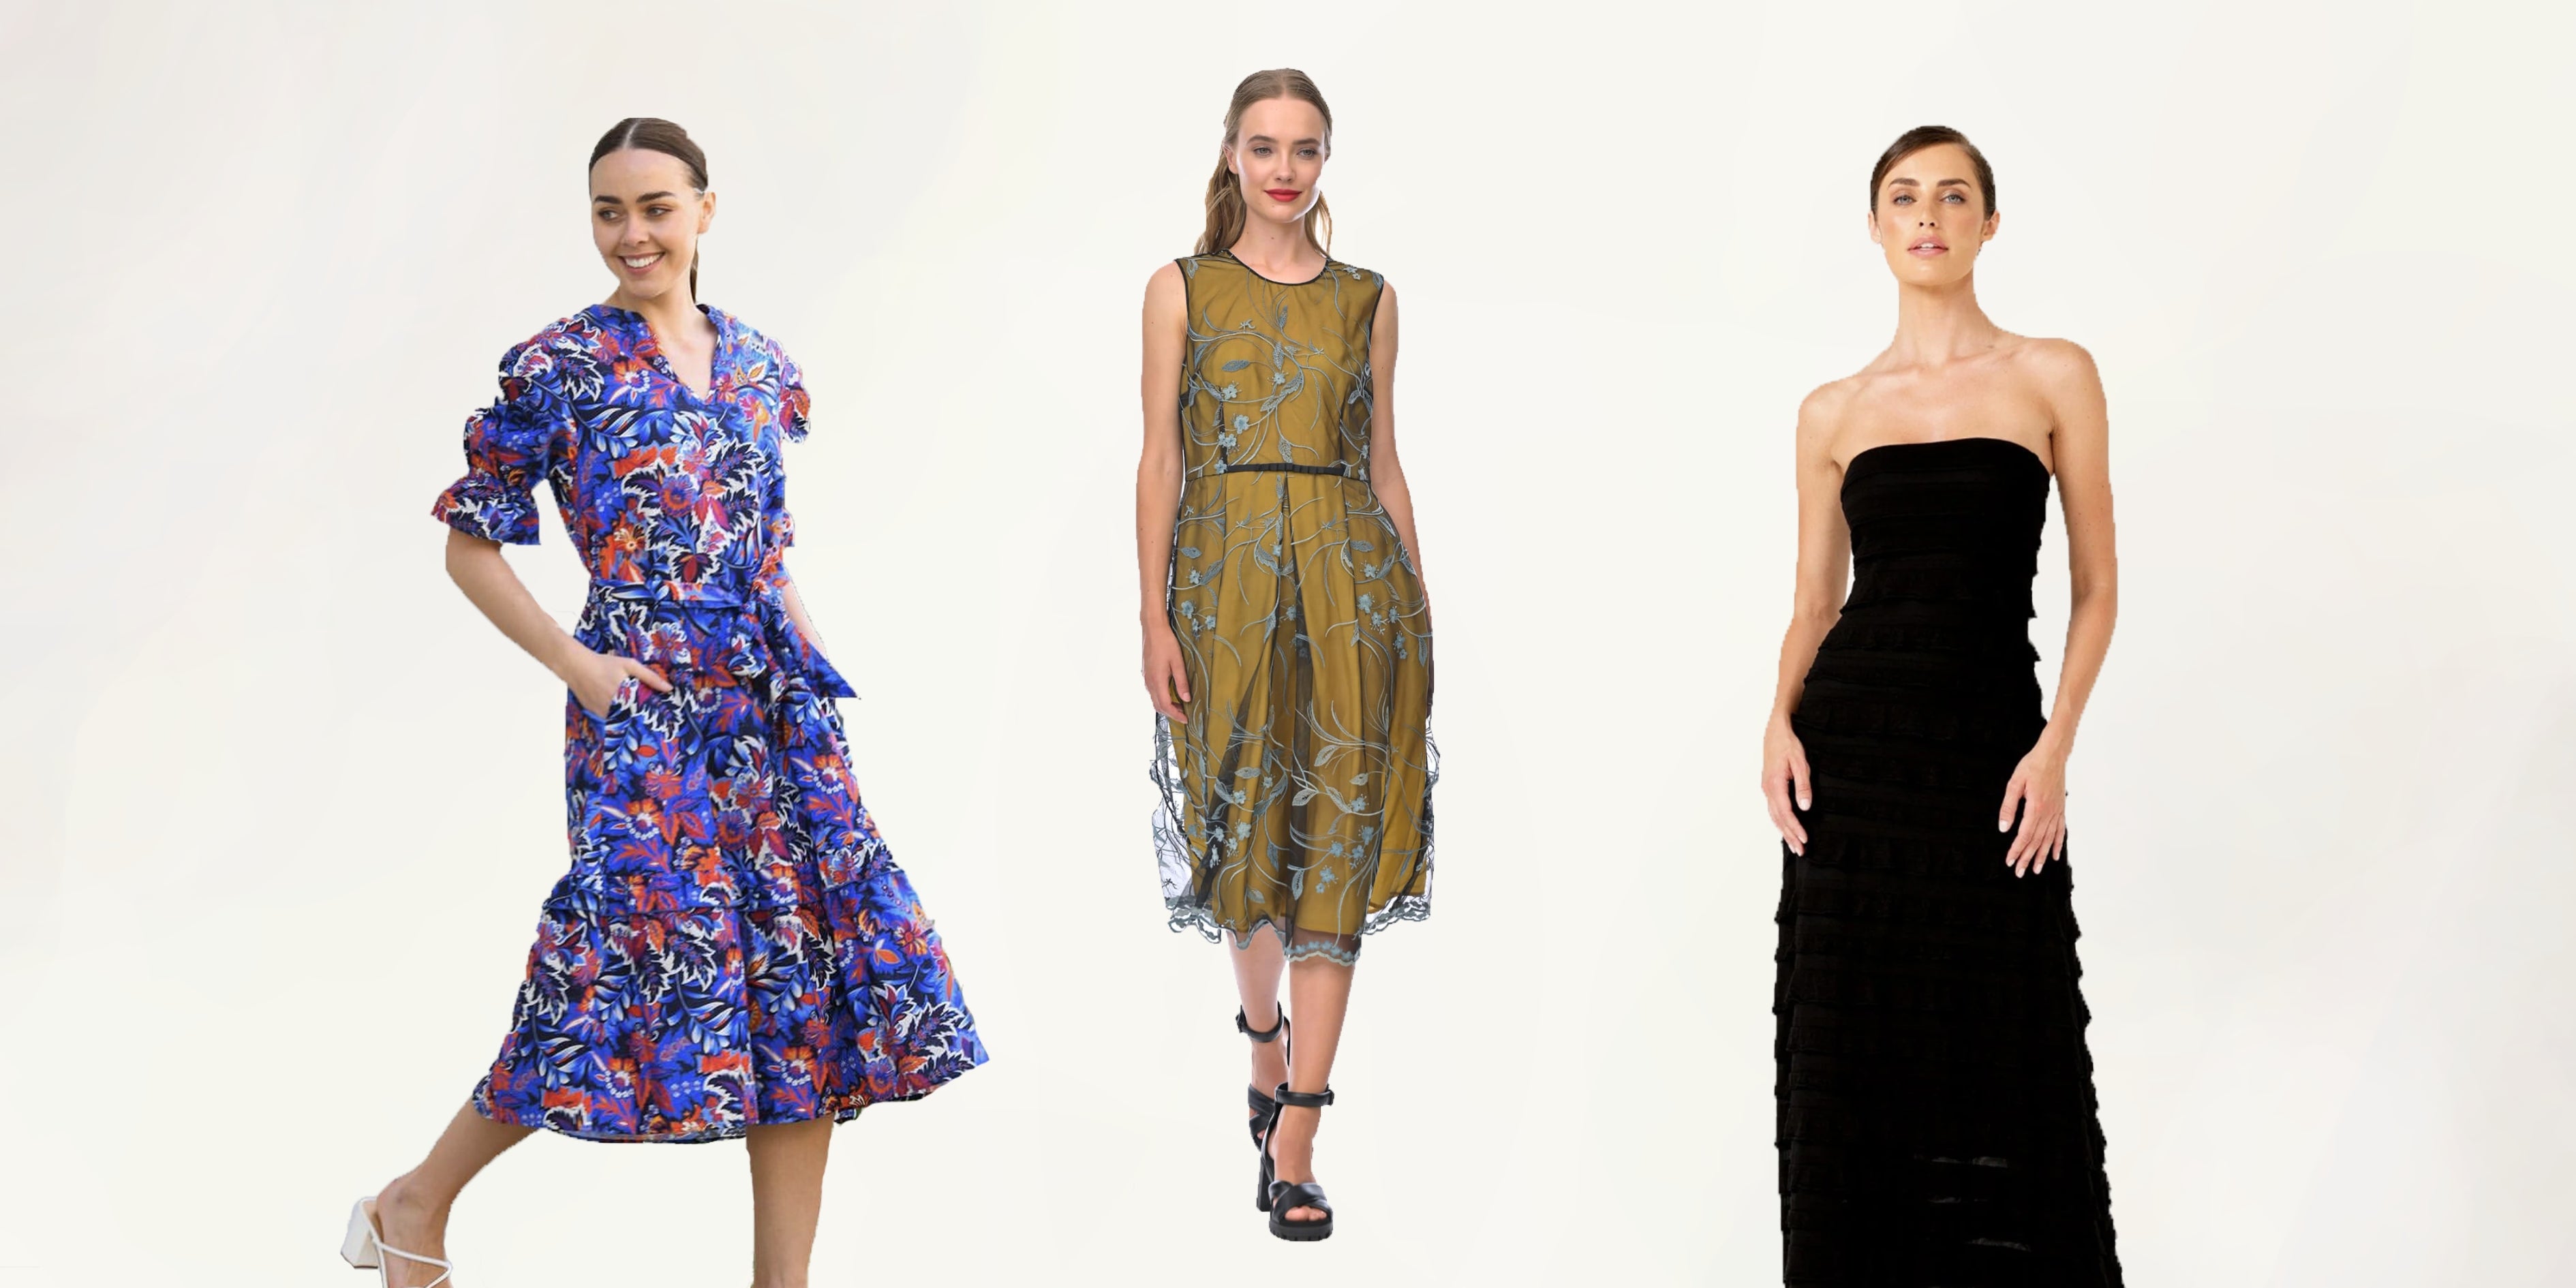 Best dresses for women over 50, recommended by an expert